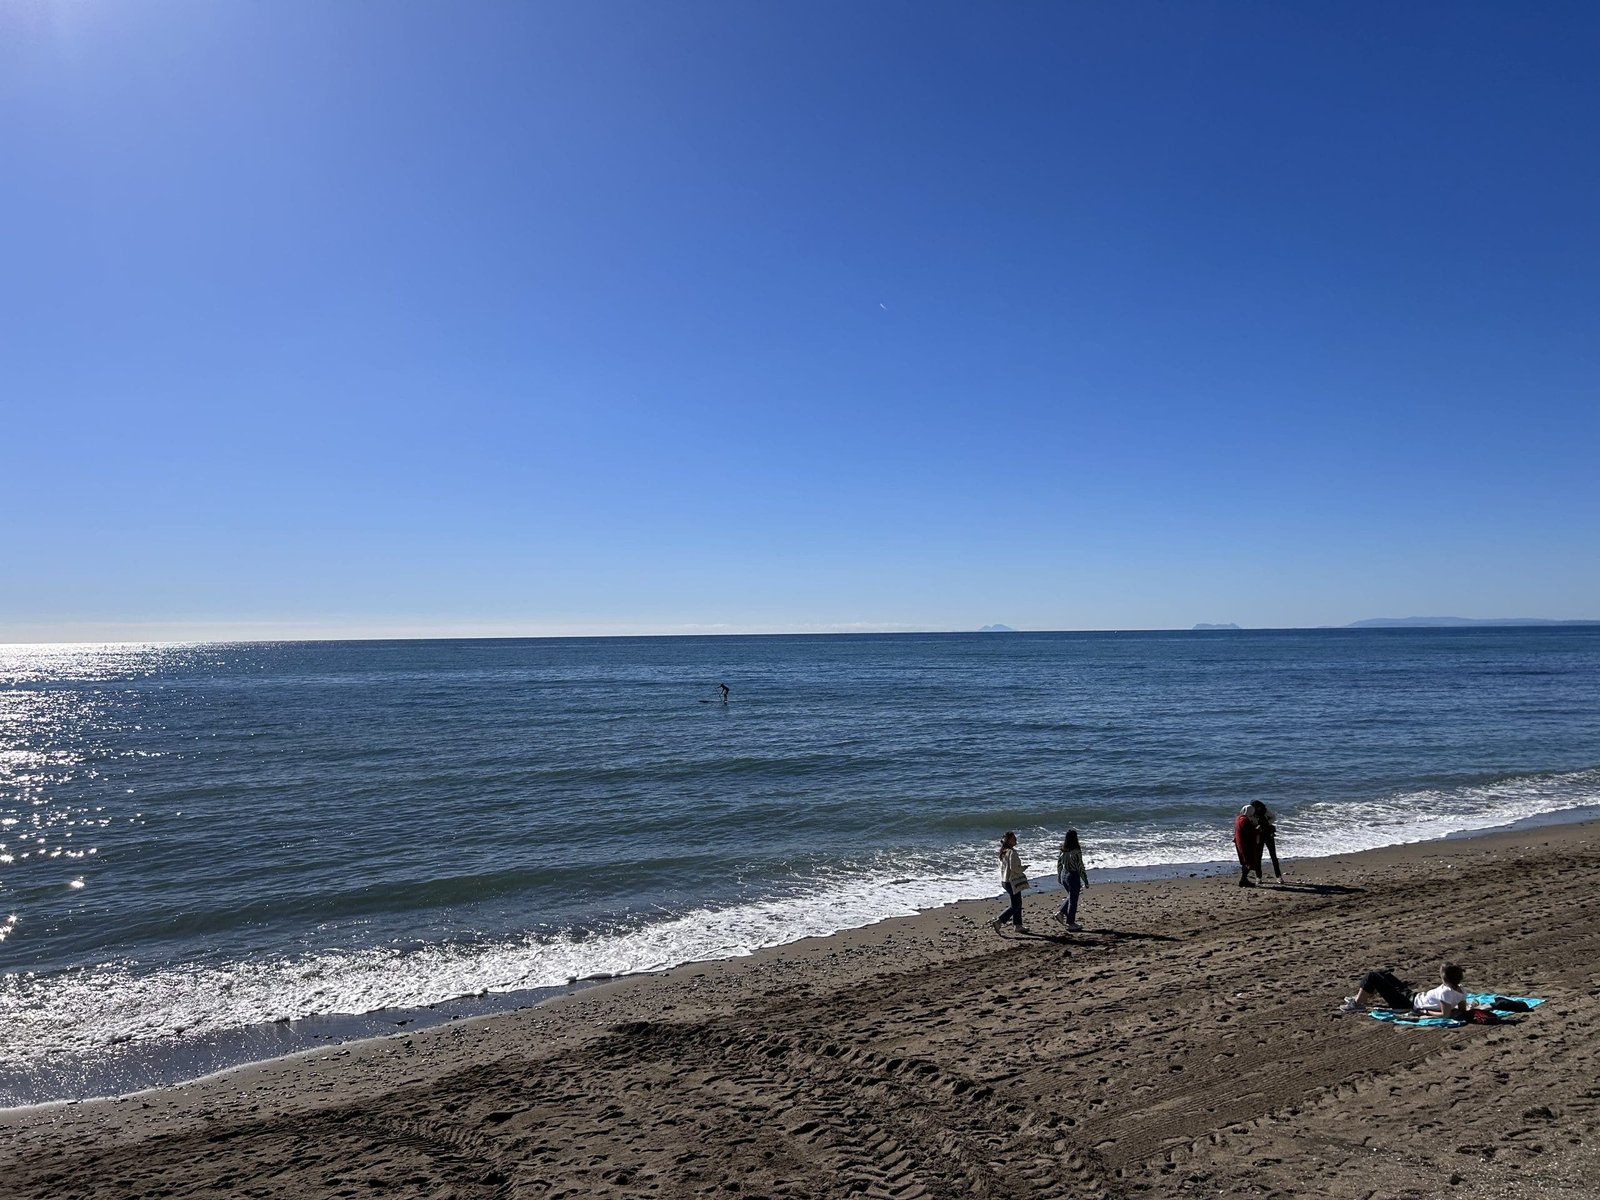 Spain's Costa del Sol Overflows with Sun Seekers and Swimmers as Mercury Soars above 20C - img 6034 scaled 1 - Lifestyle and Entertainment - Sun Seekers and Swimmers